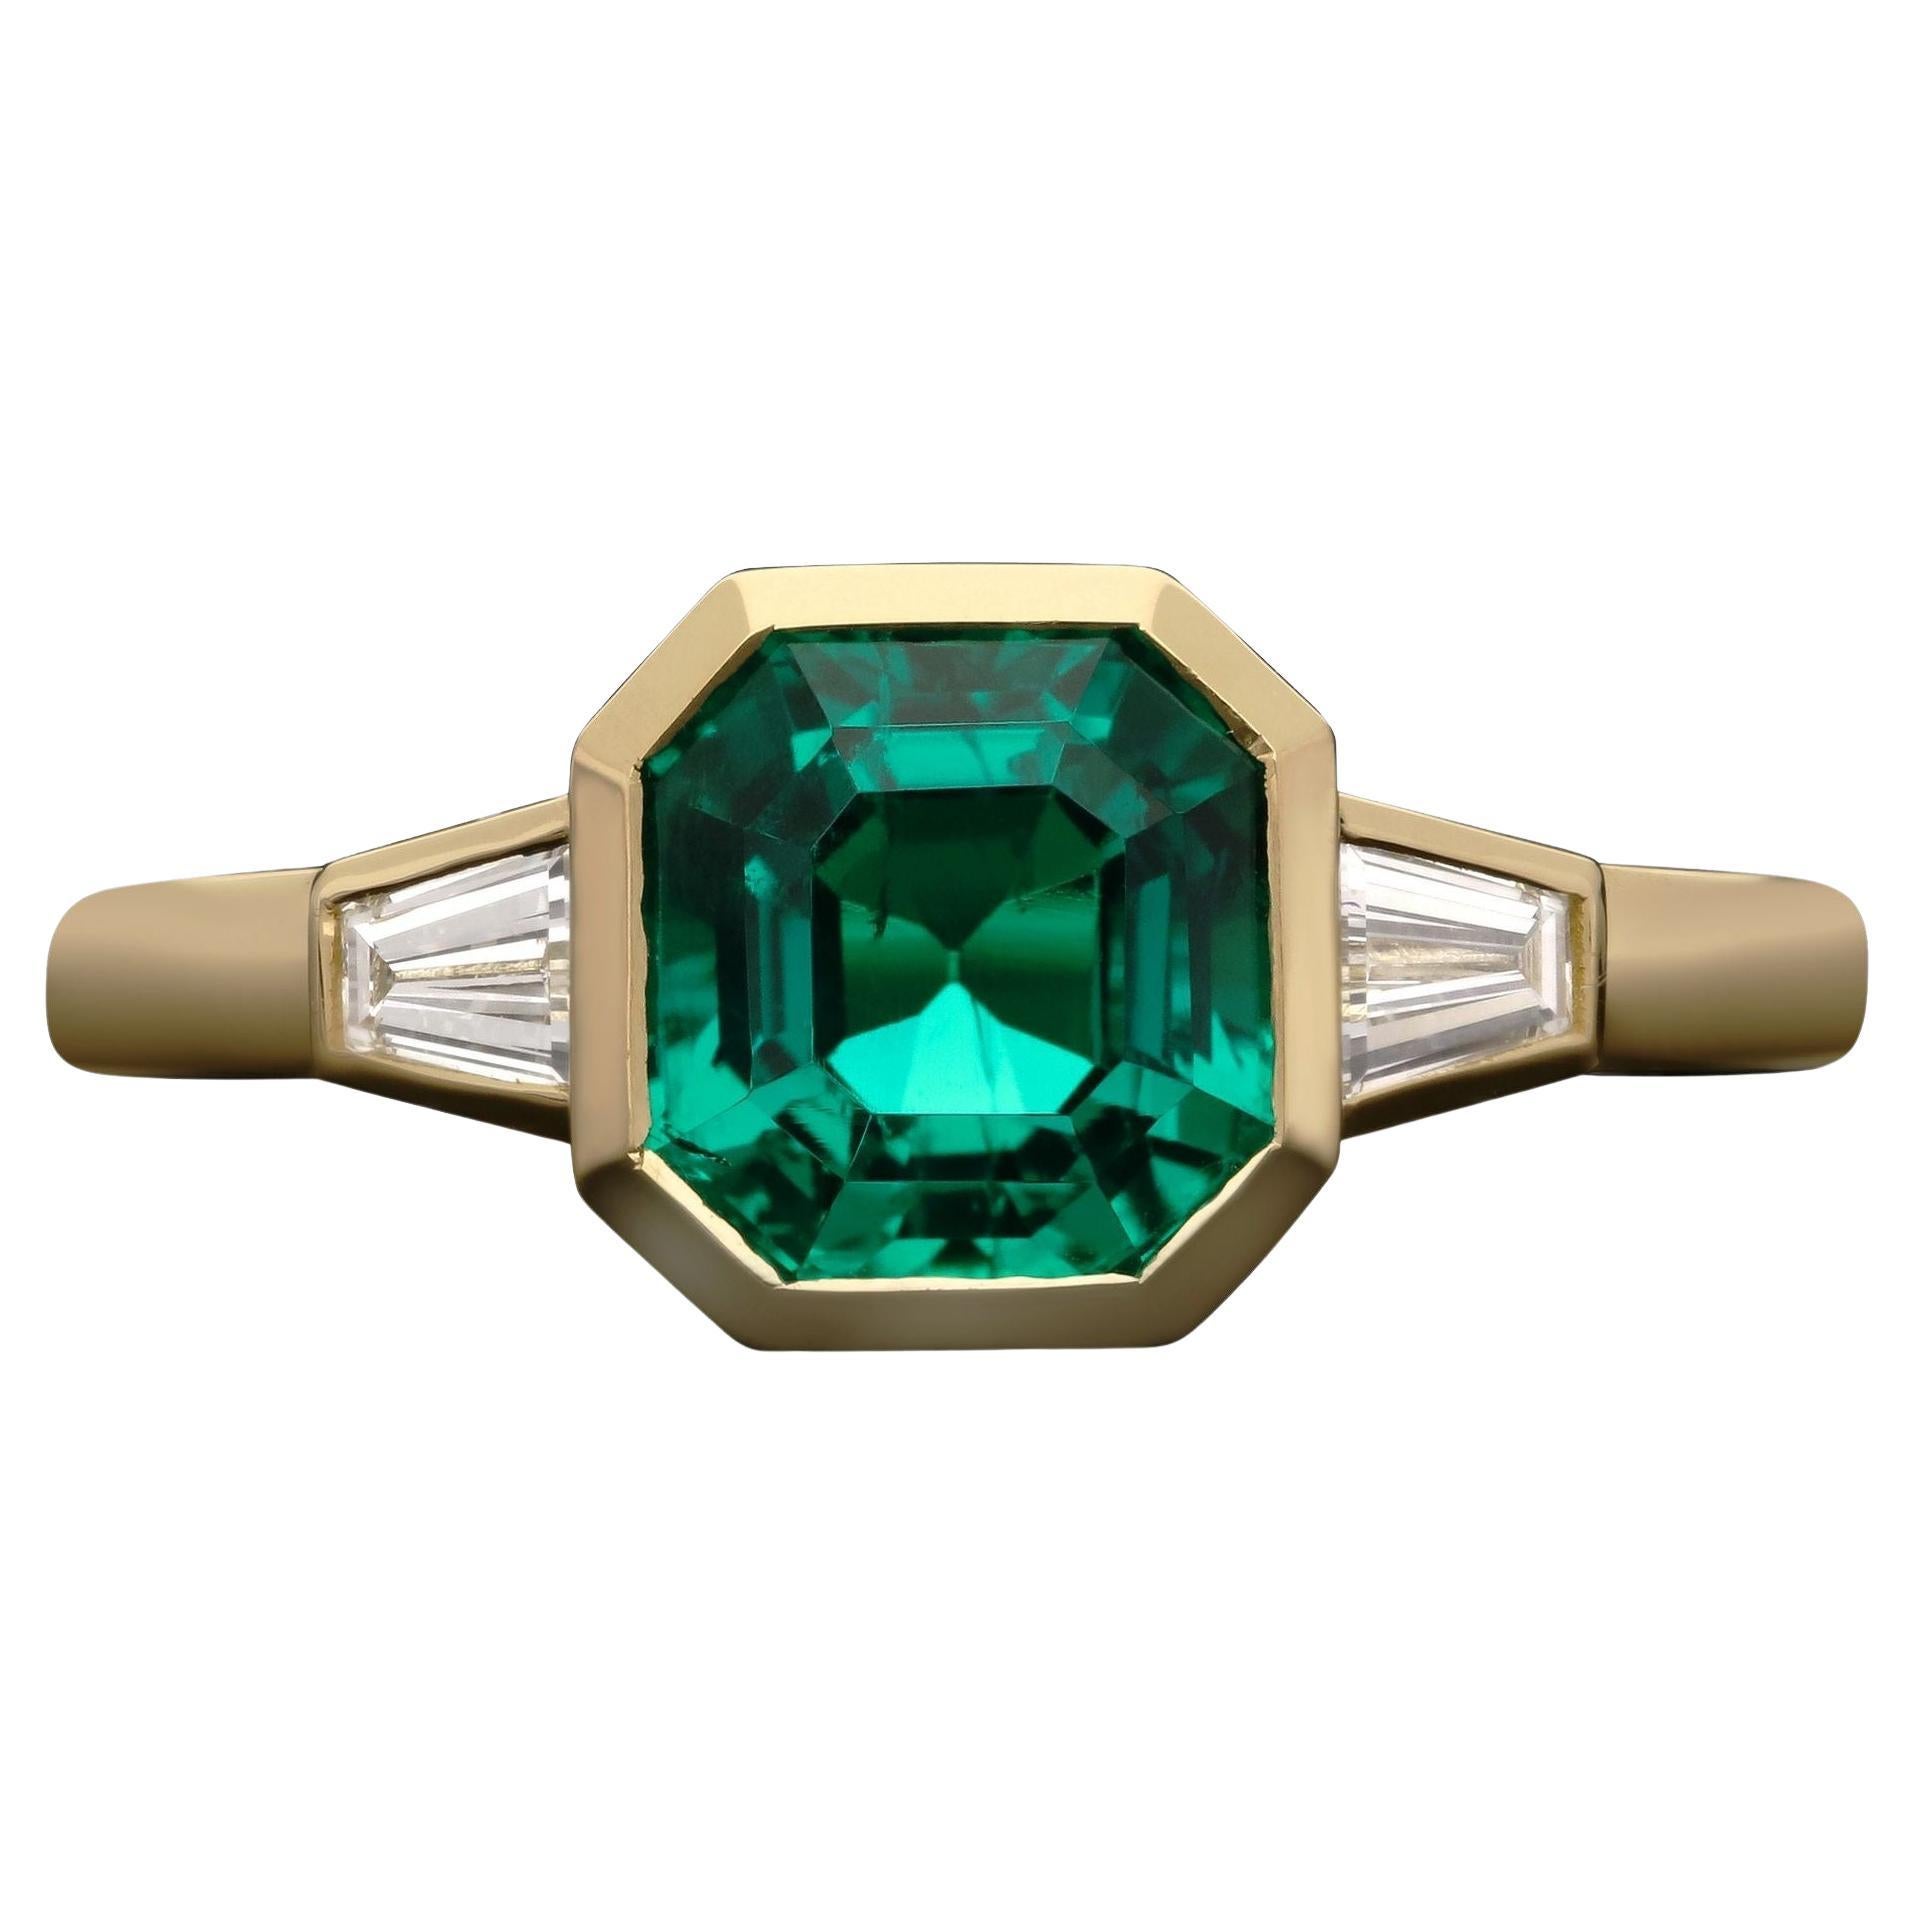 Hancocks 1.83ct Colombian Emerald Ring in 18ct Gold Baguette Diamond Shoulders For Sale